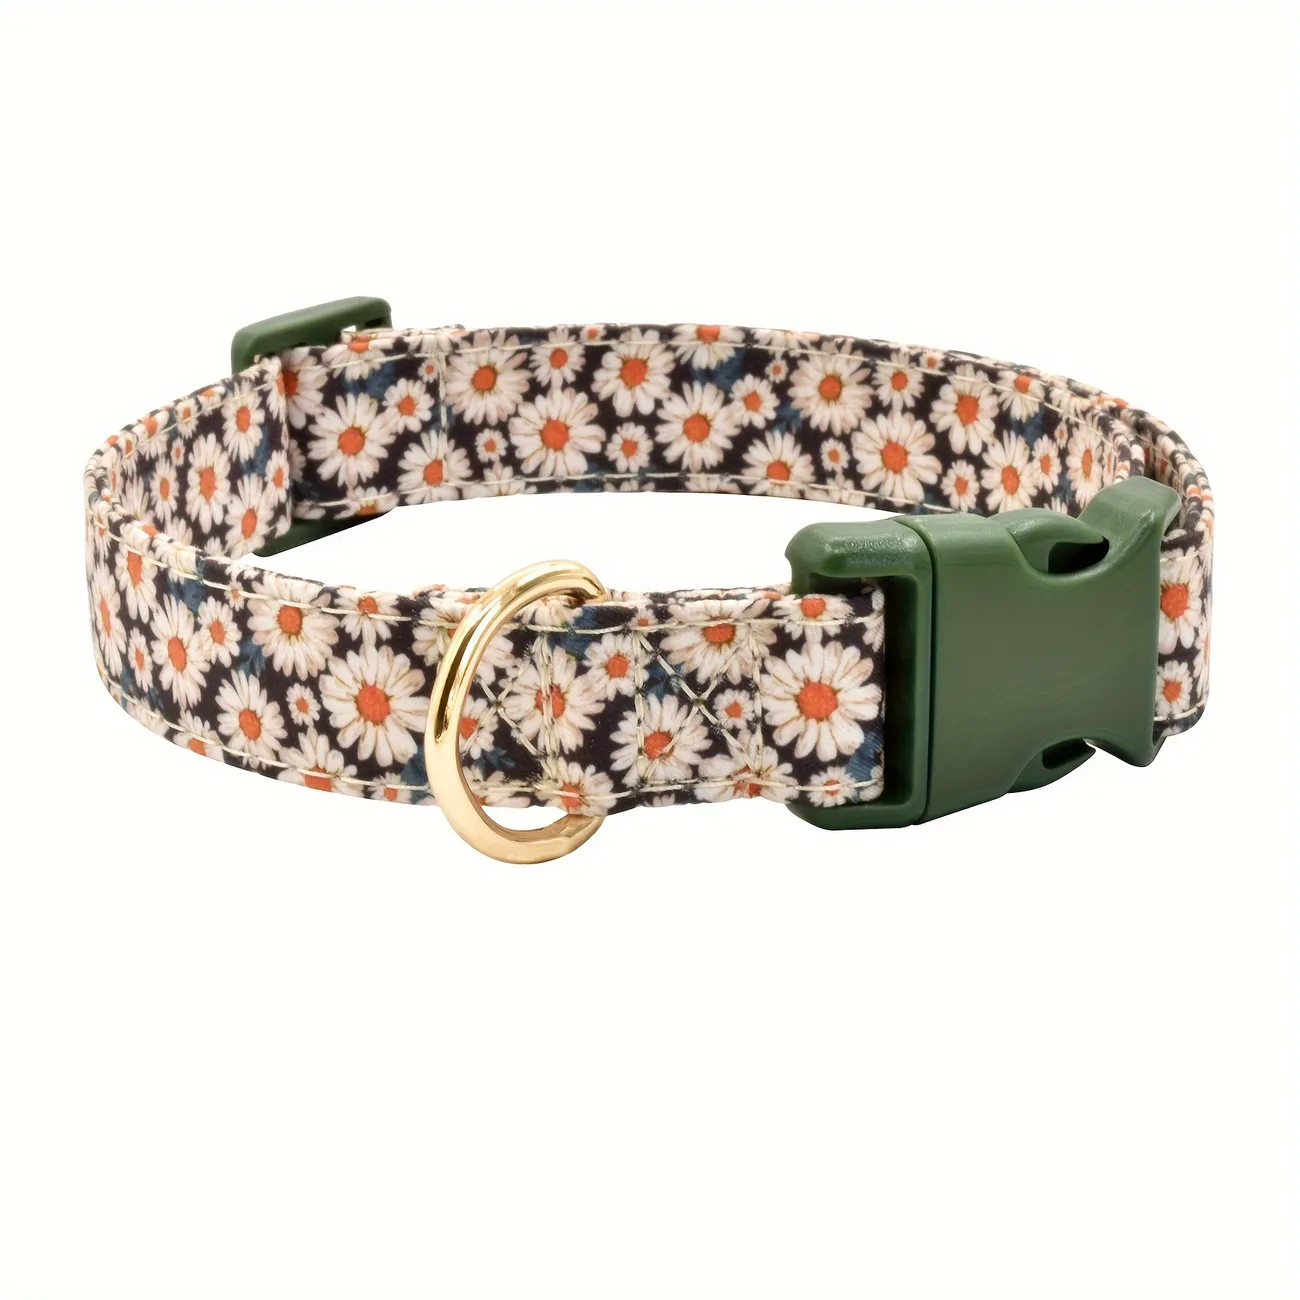 Cute Daisy Dog Collar Cotton Comfort Dog Collar Suitable For Small